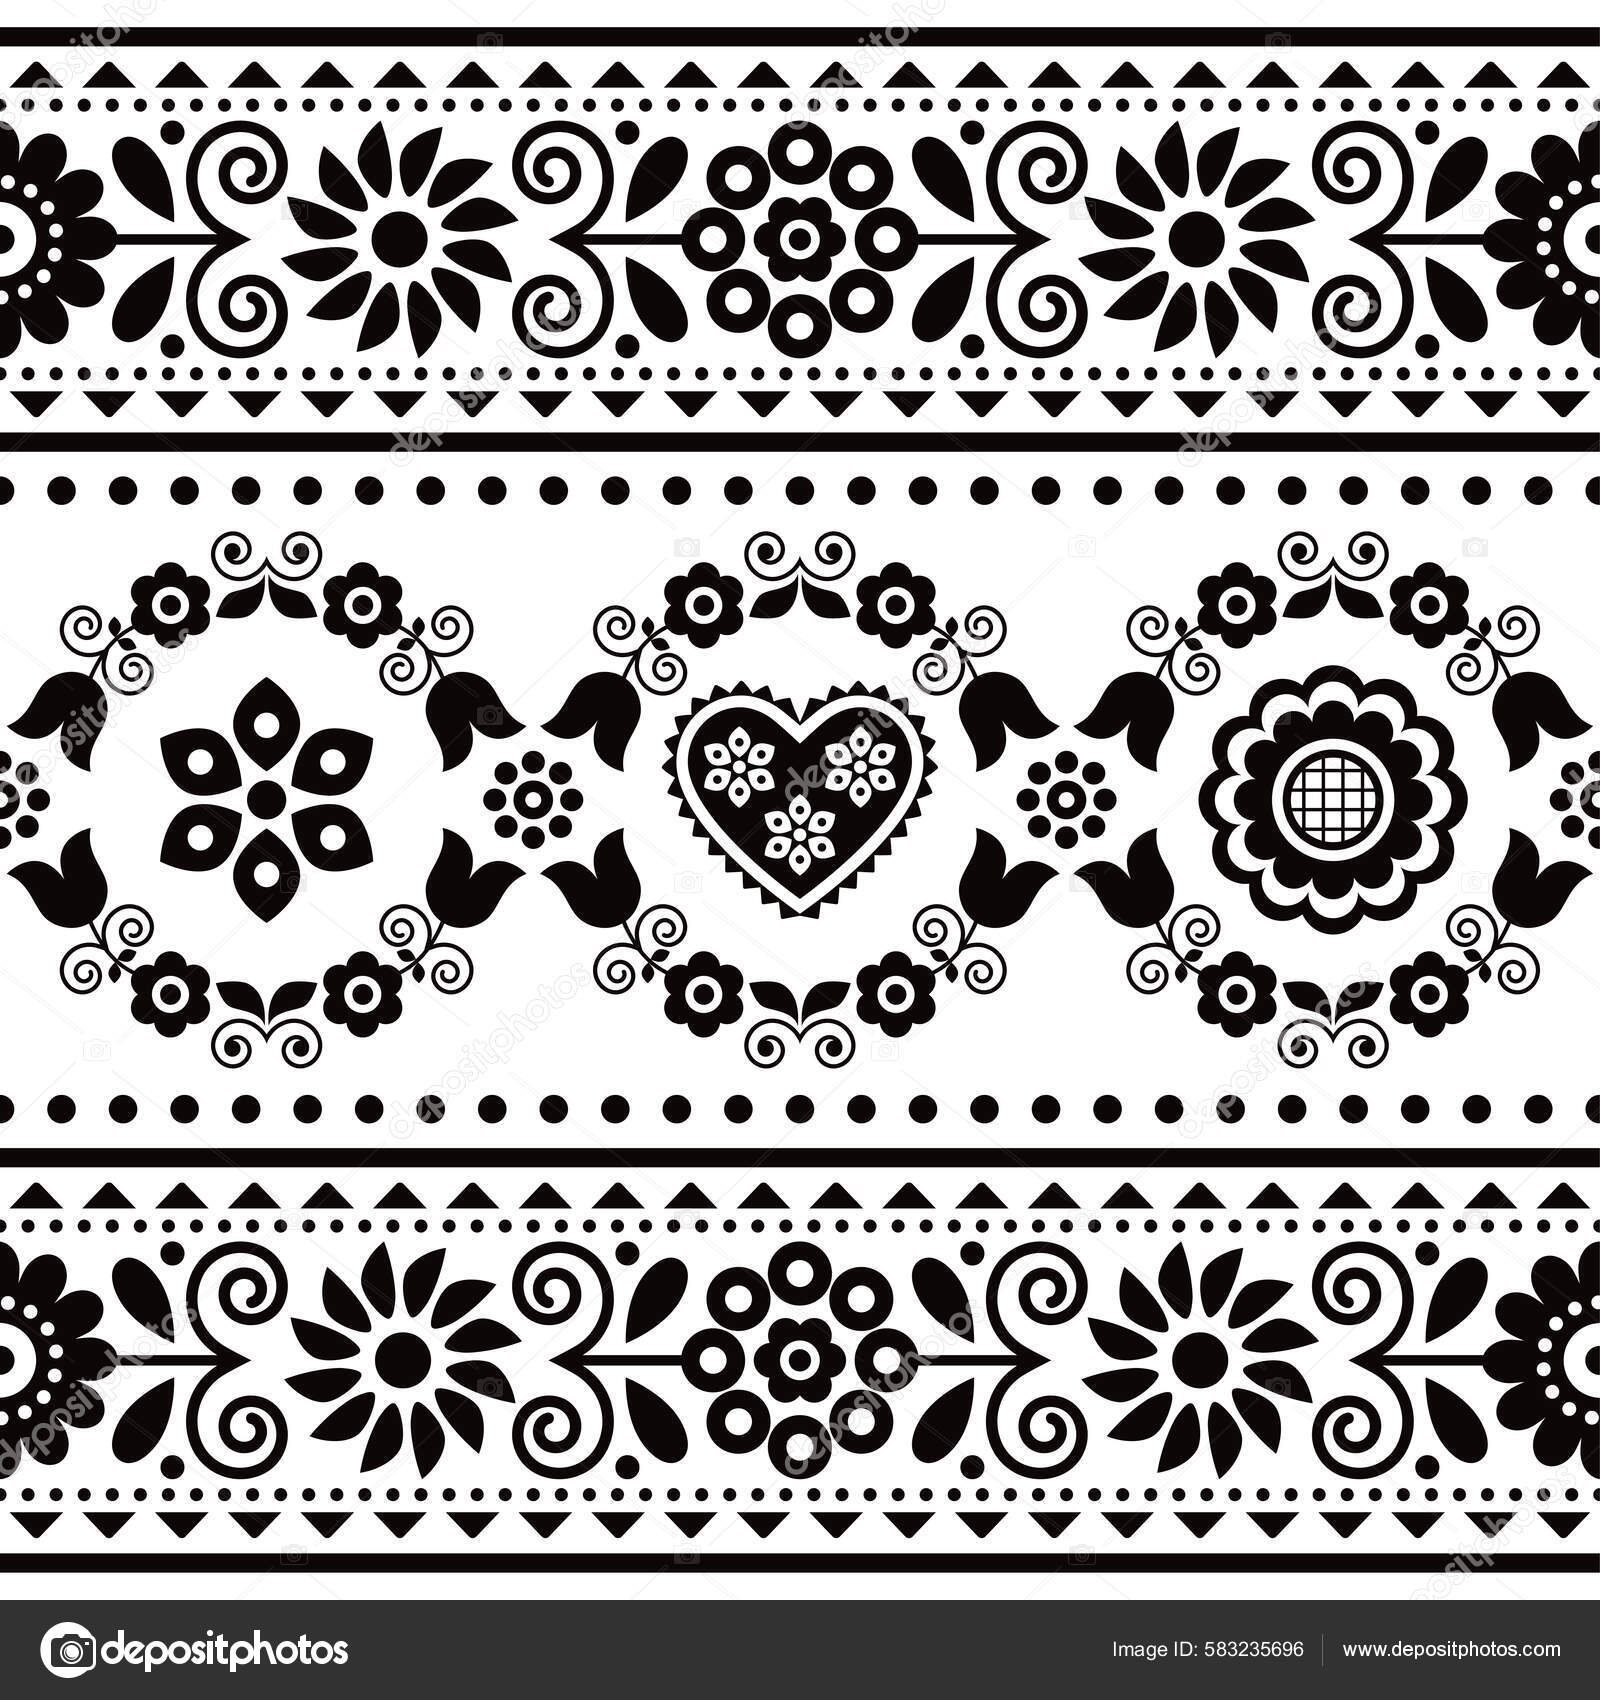 Printable flower embroidery pattern design Vector Image